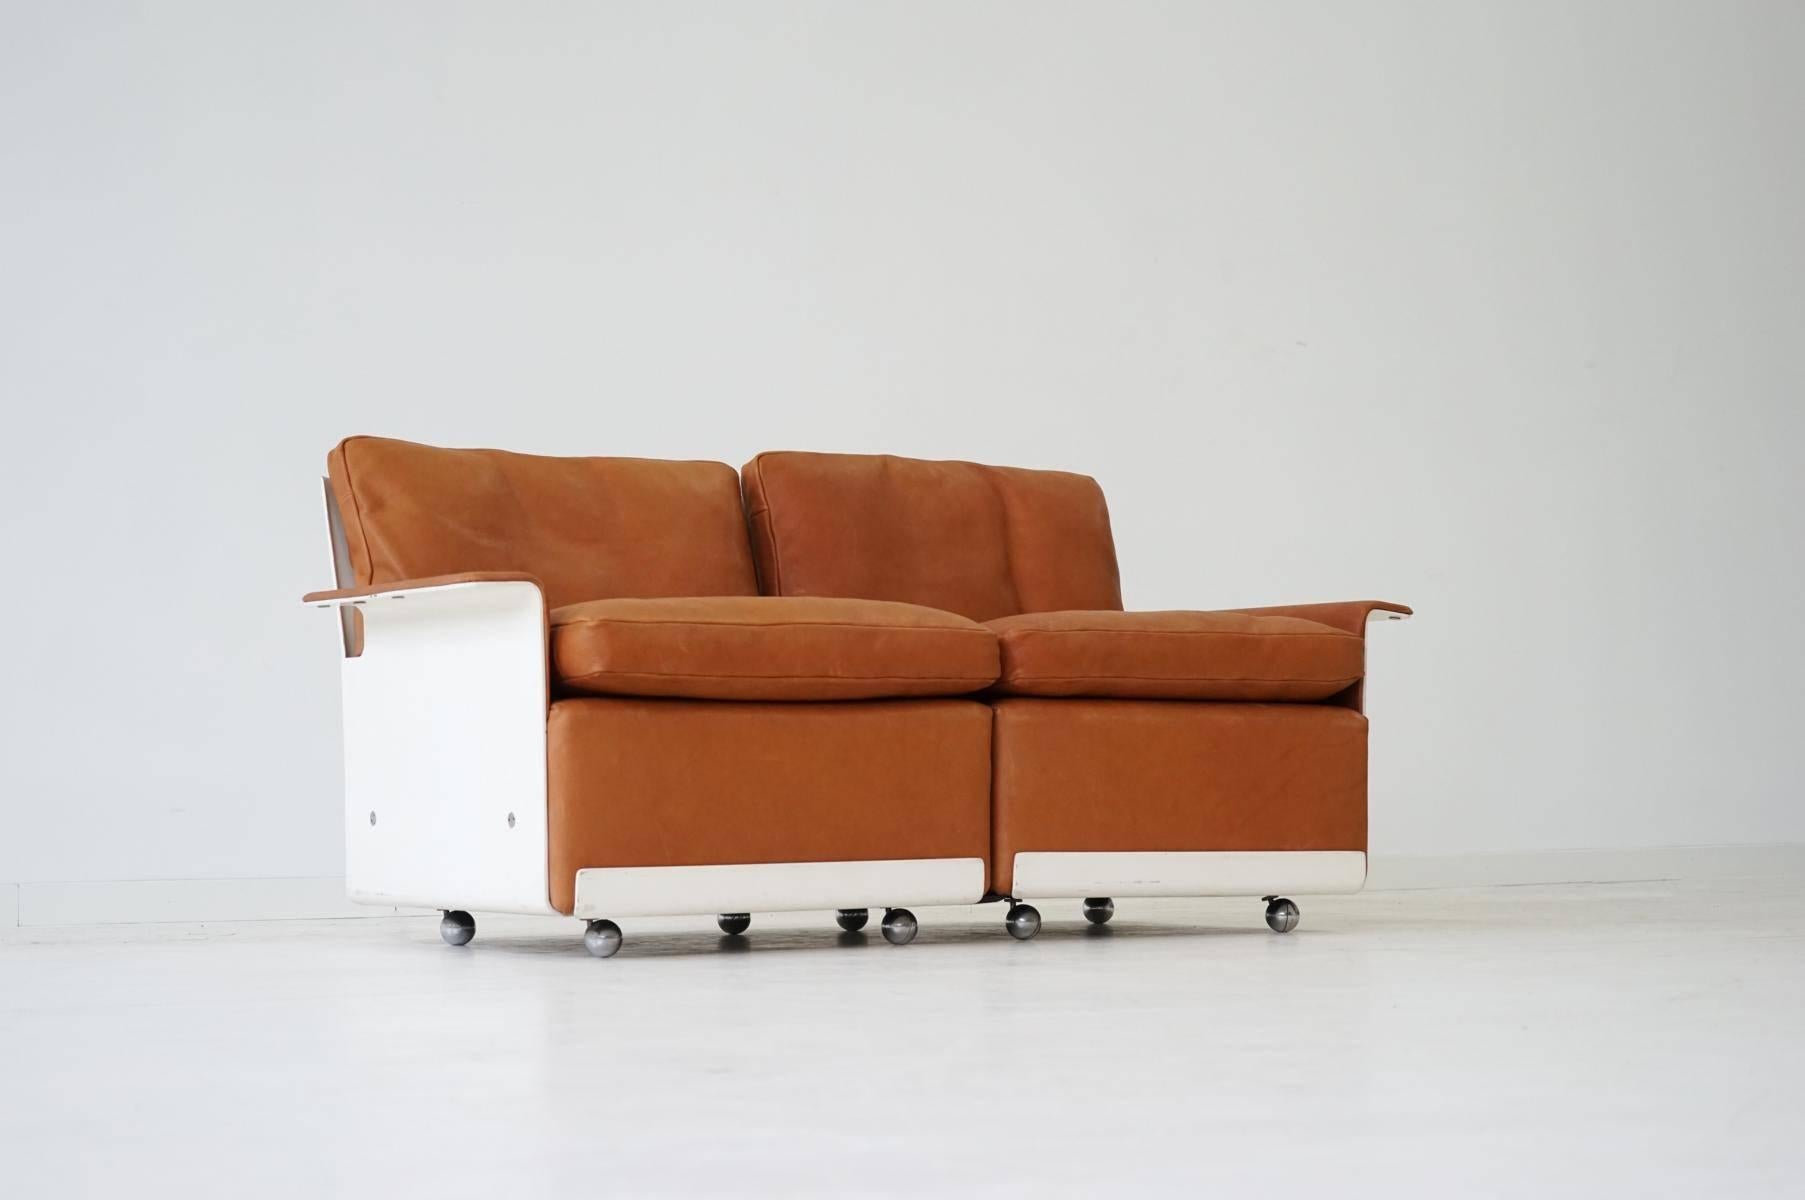 Early RZ 62 620 modular two-seat sofa in leather by Dieter Rams for Vitsoe, 1960s. Design history from Dieter Rams! Excellent condition.
This RZ 62 model is a very early version with production from the, 1960s. The exact difference to the later